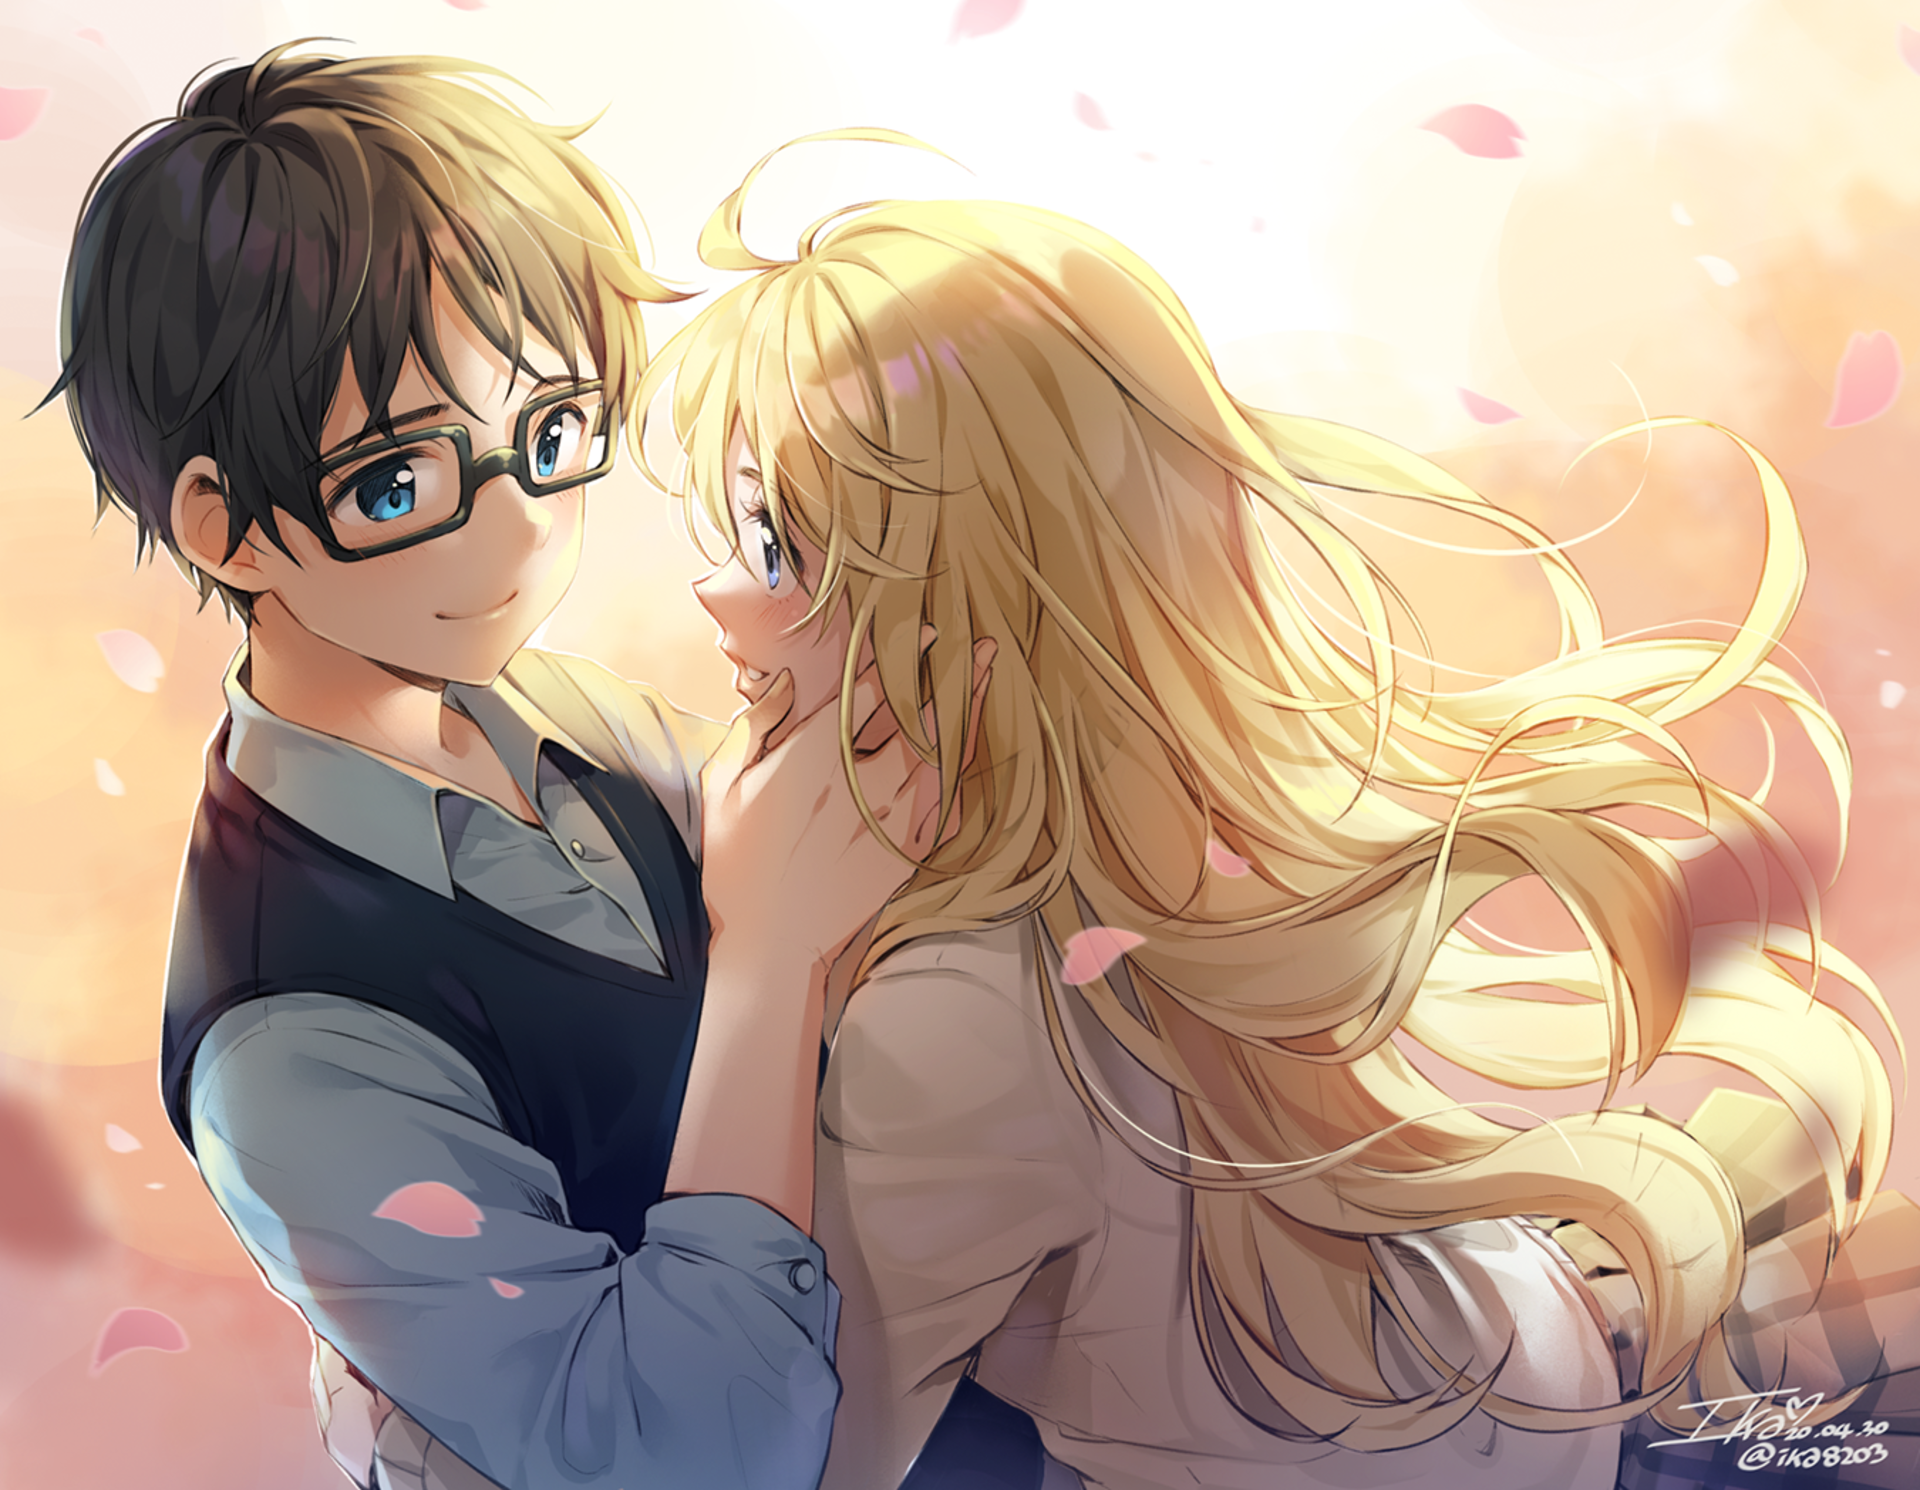 Your Lie In April Director's New Original Anime Film Gets Popping New  Trailer - Crunchyroll News